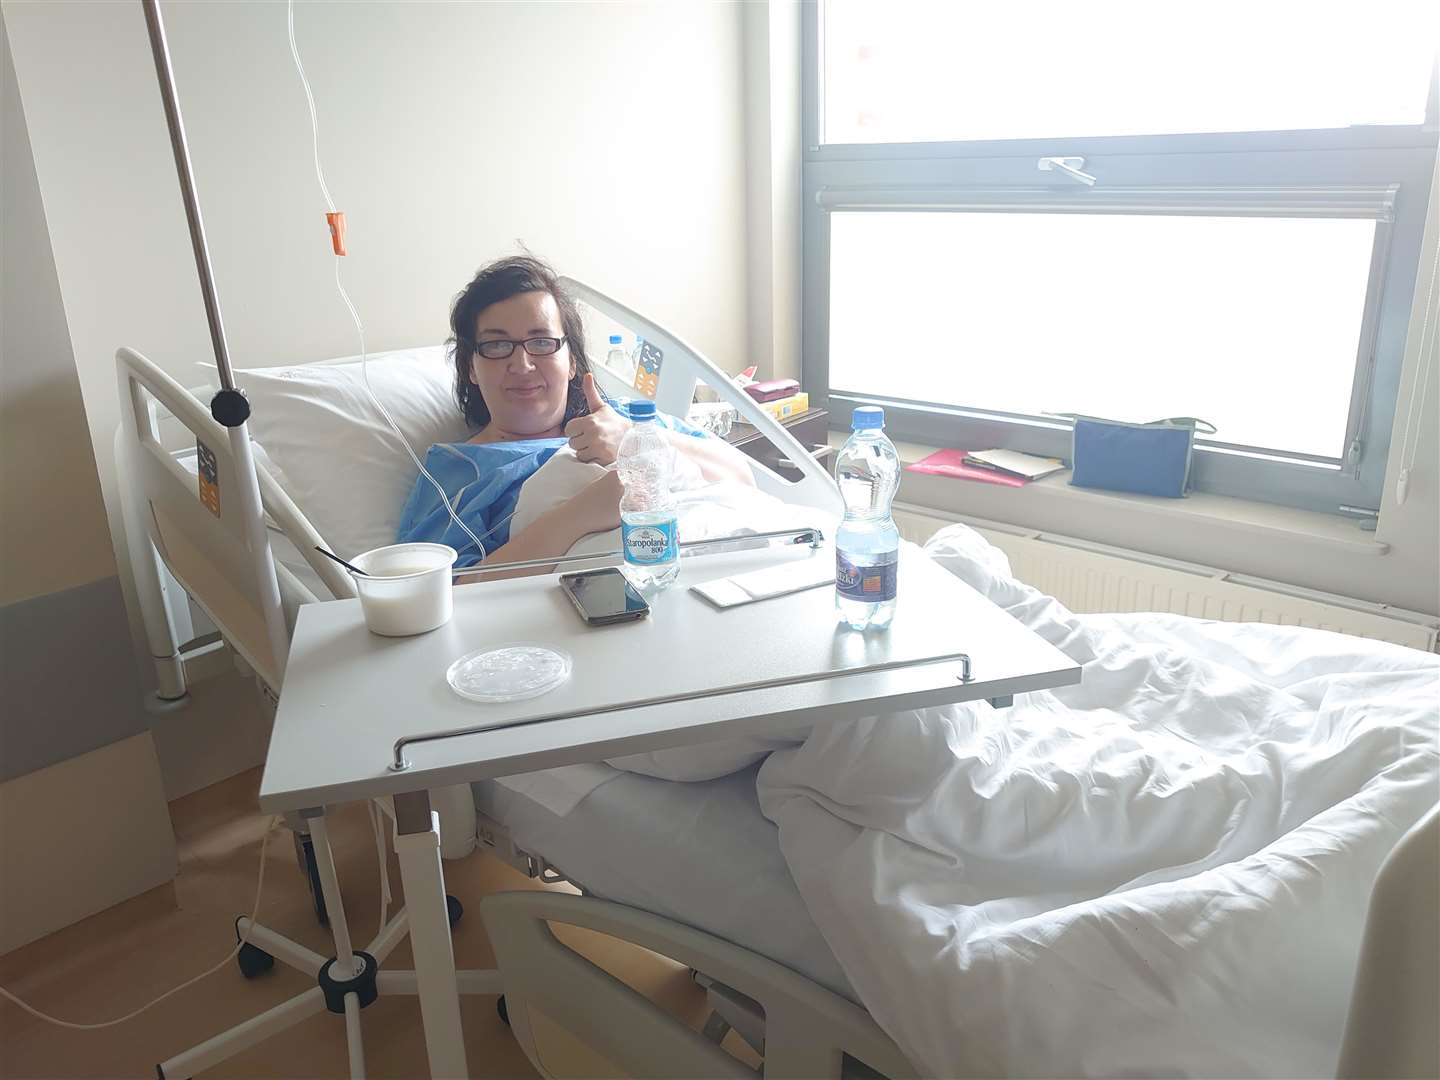 Agnieszka recovering at the hospital in Poland